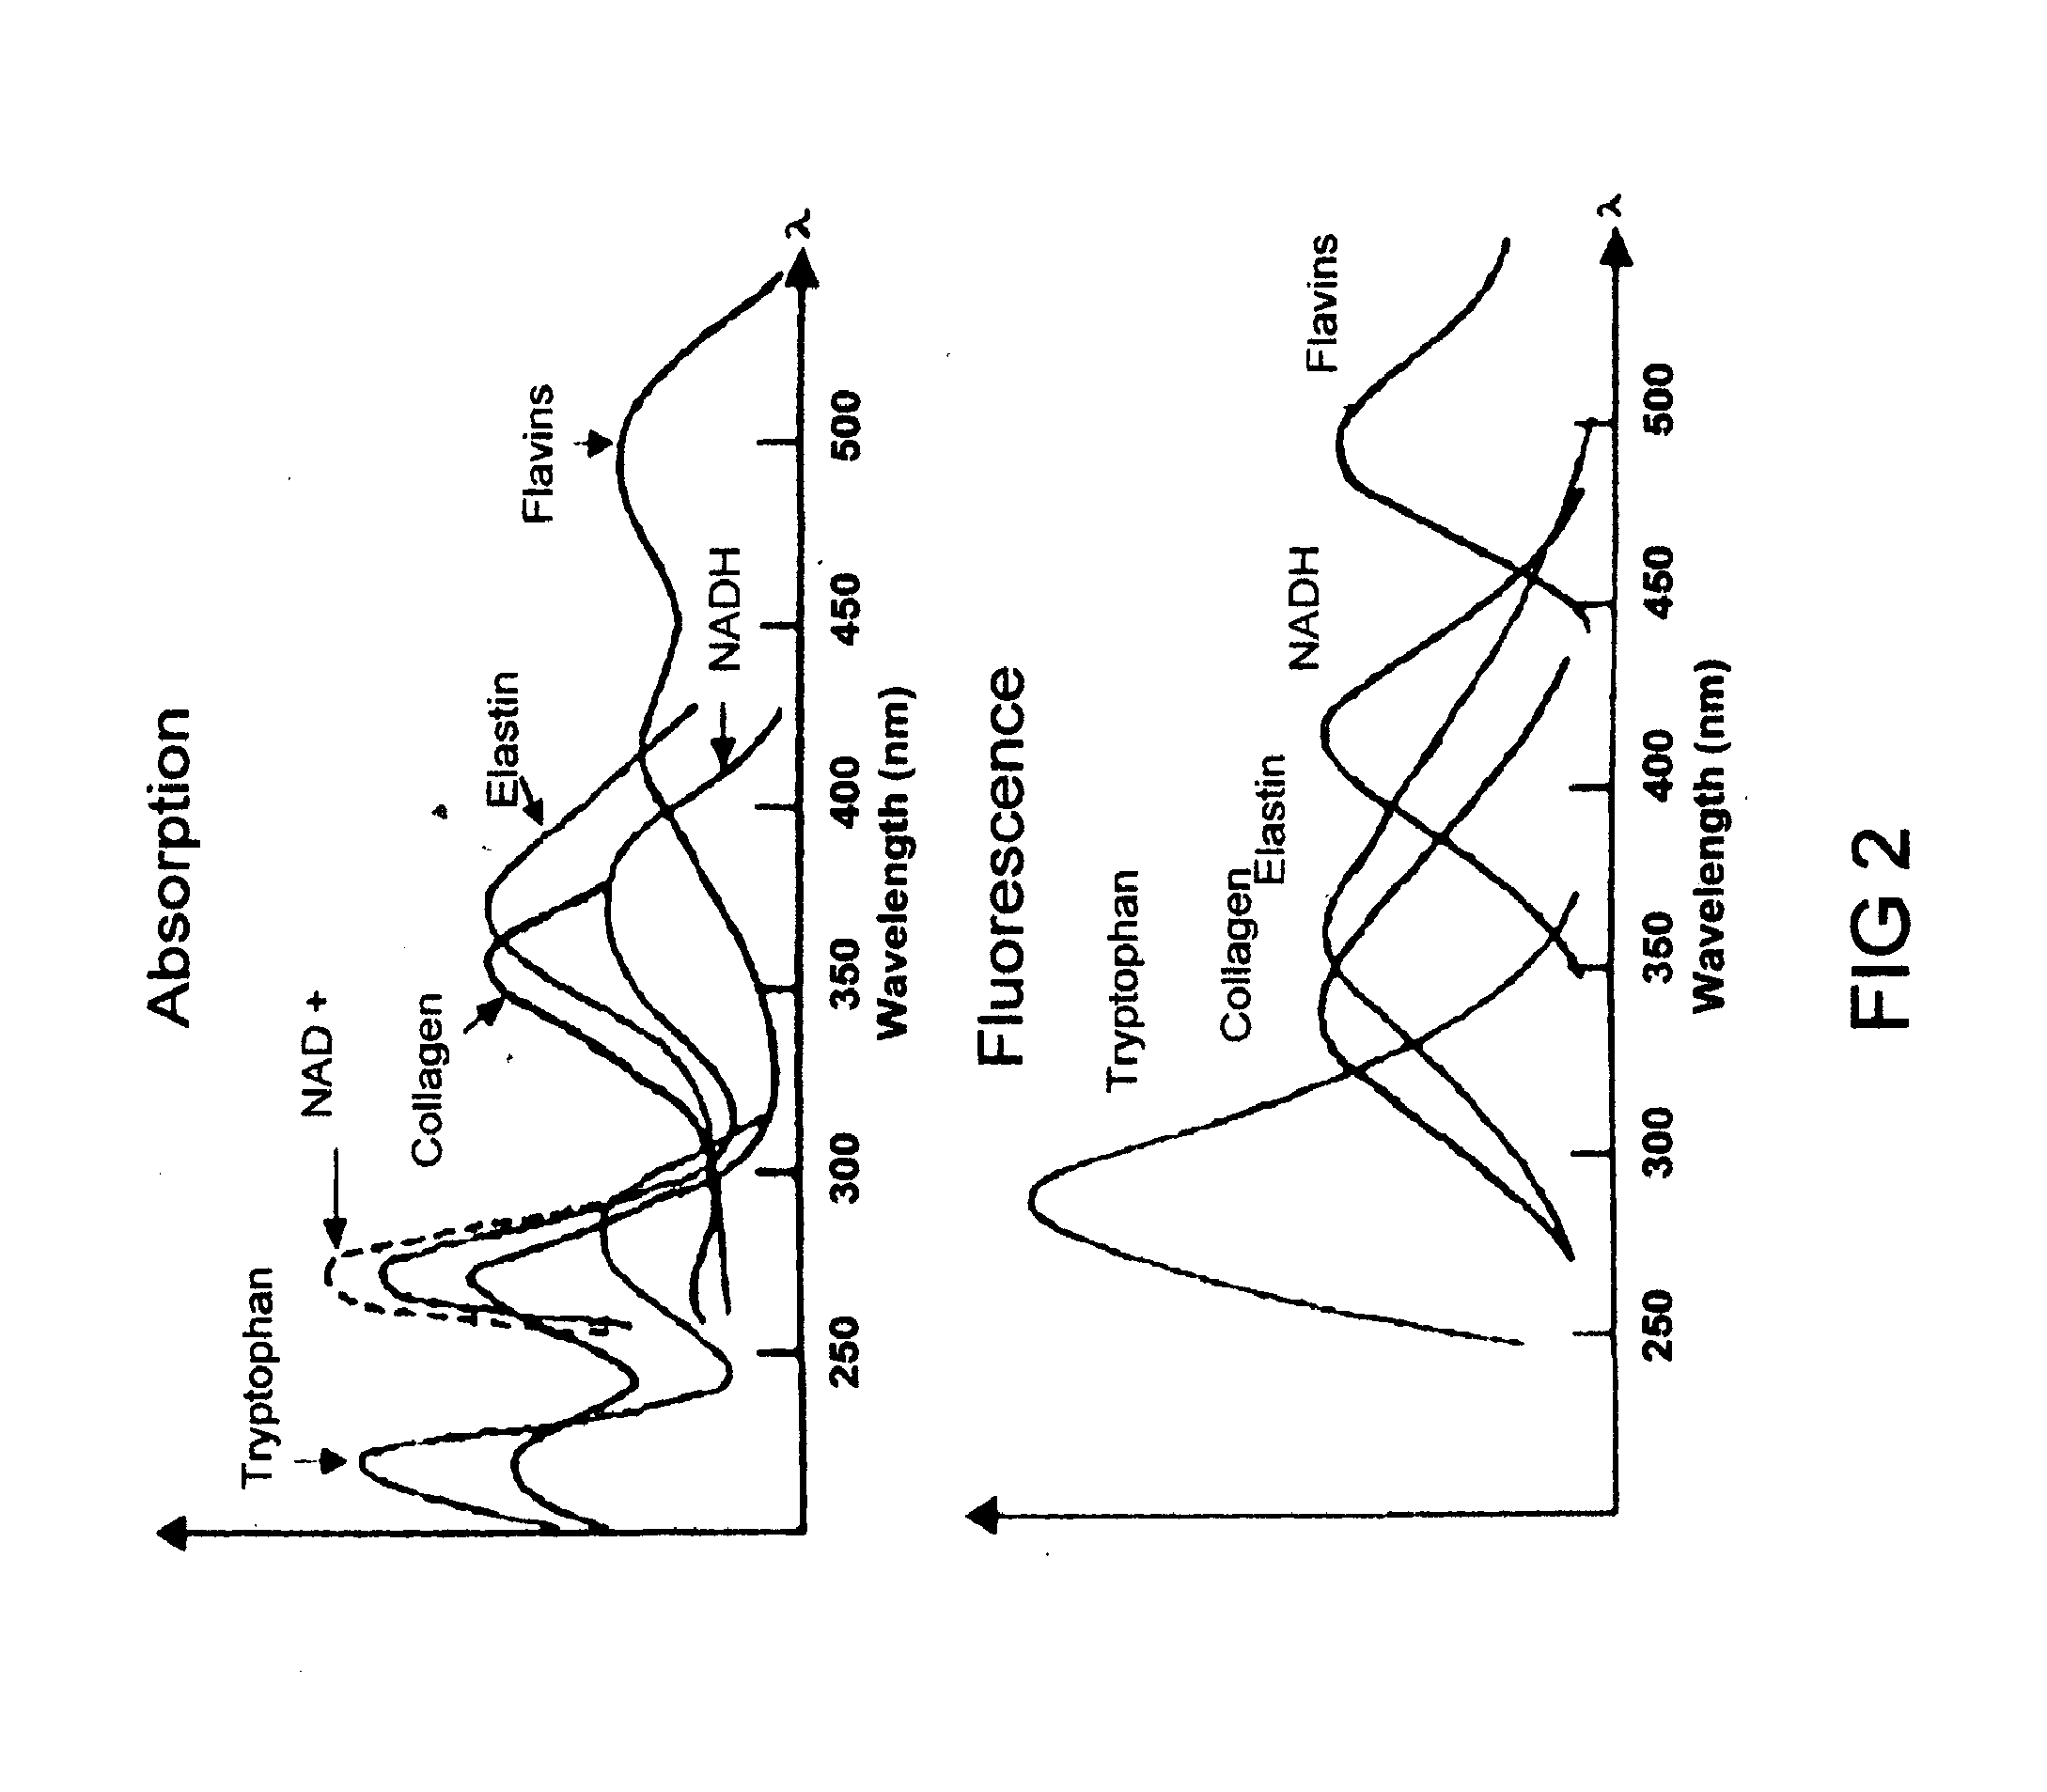 Method and Apparatus for Cervical Cancer Screening